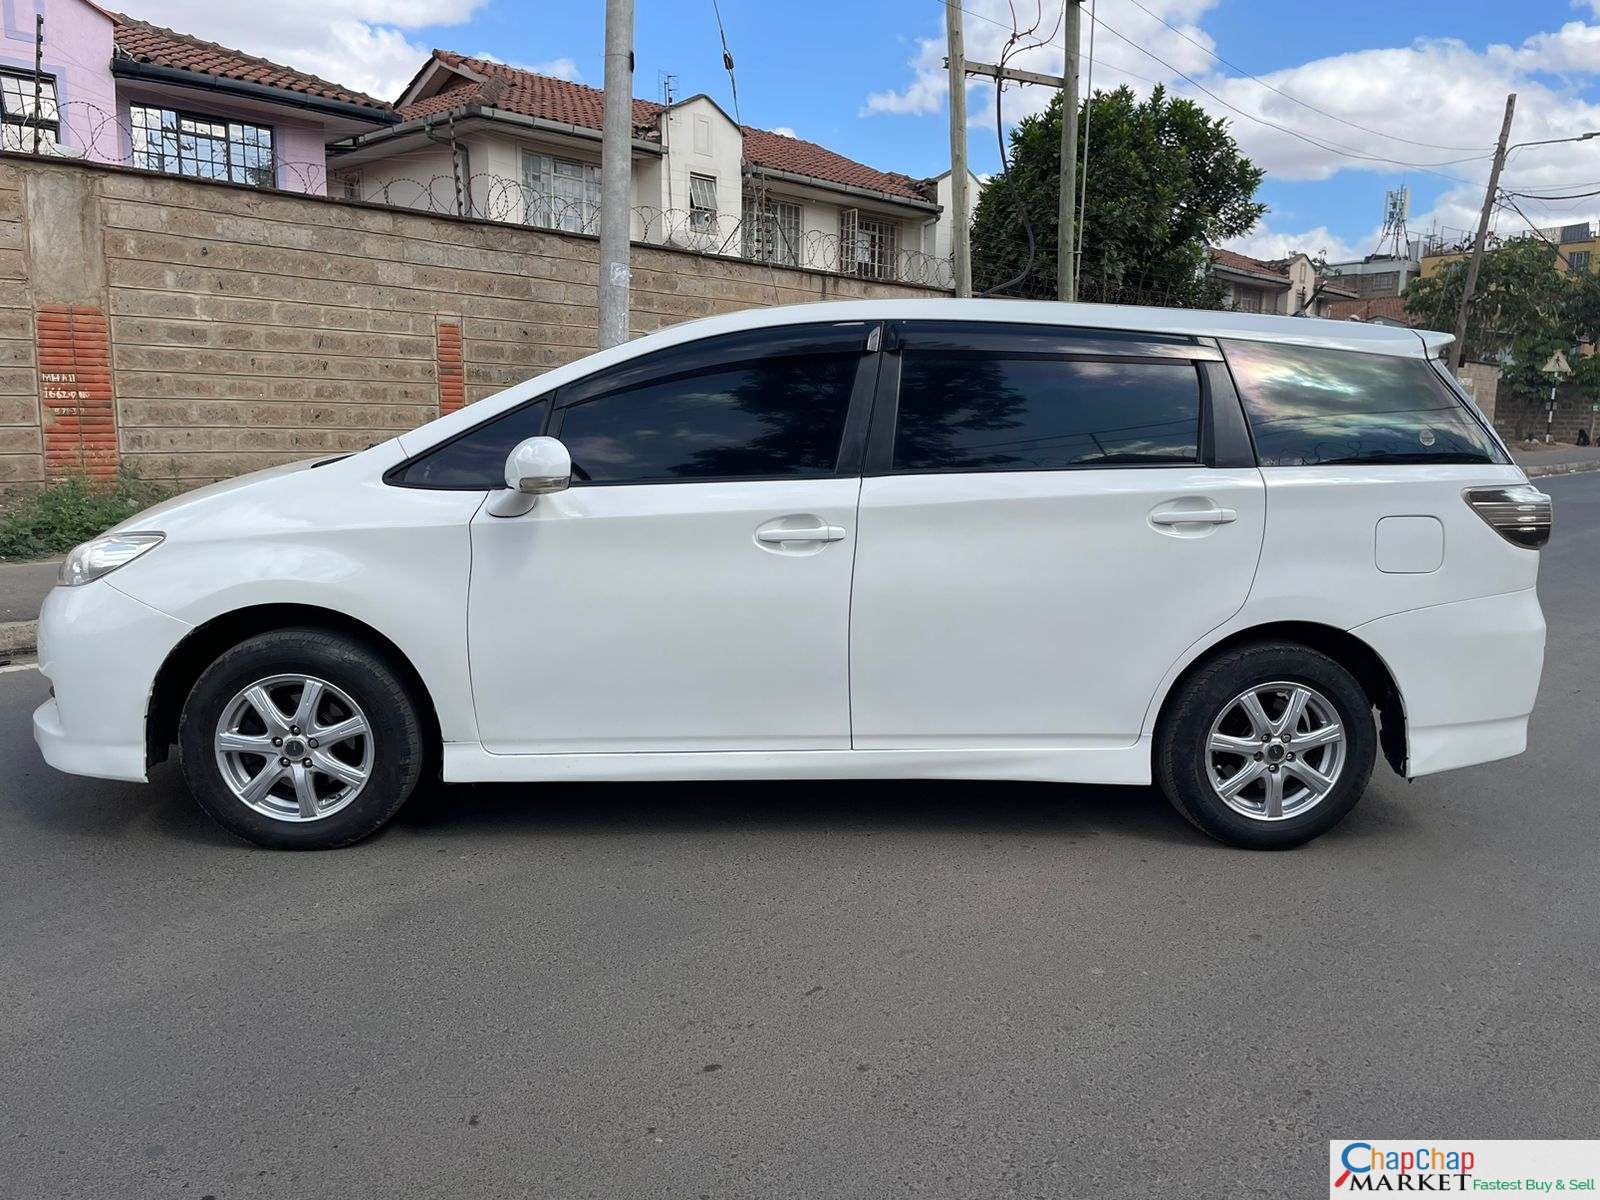 Toyota WISH for sale in Kenya You Pay 30% Deposit Trade in EXCLUSIVE Hire Purchase Installments bank finance Ok